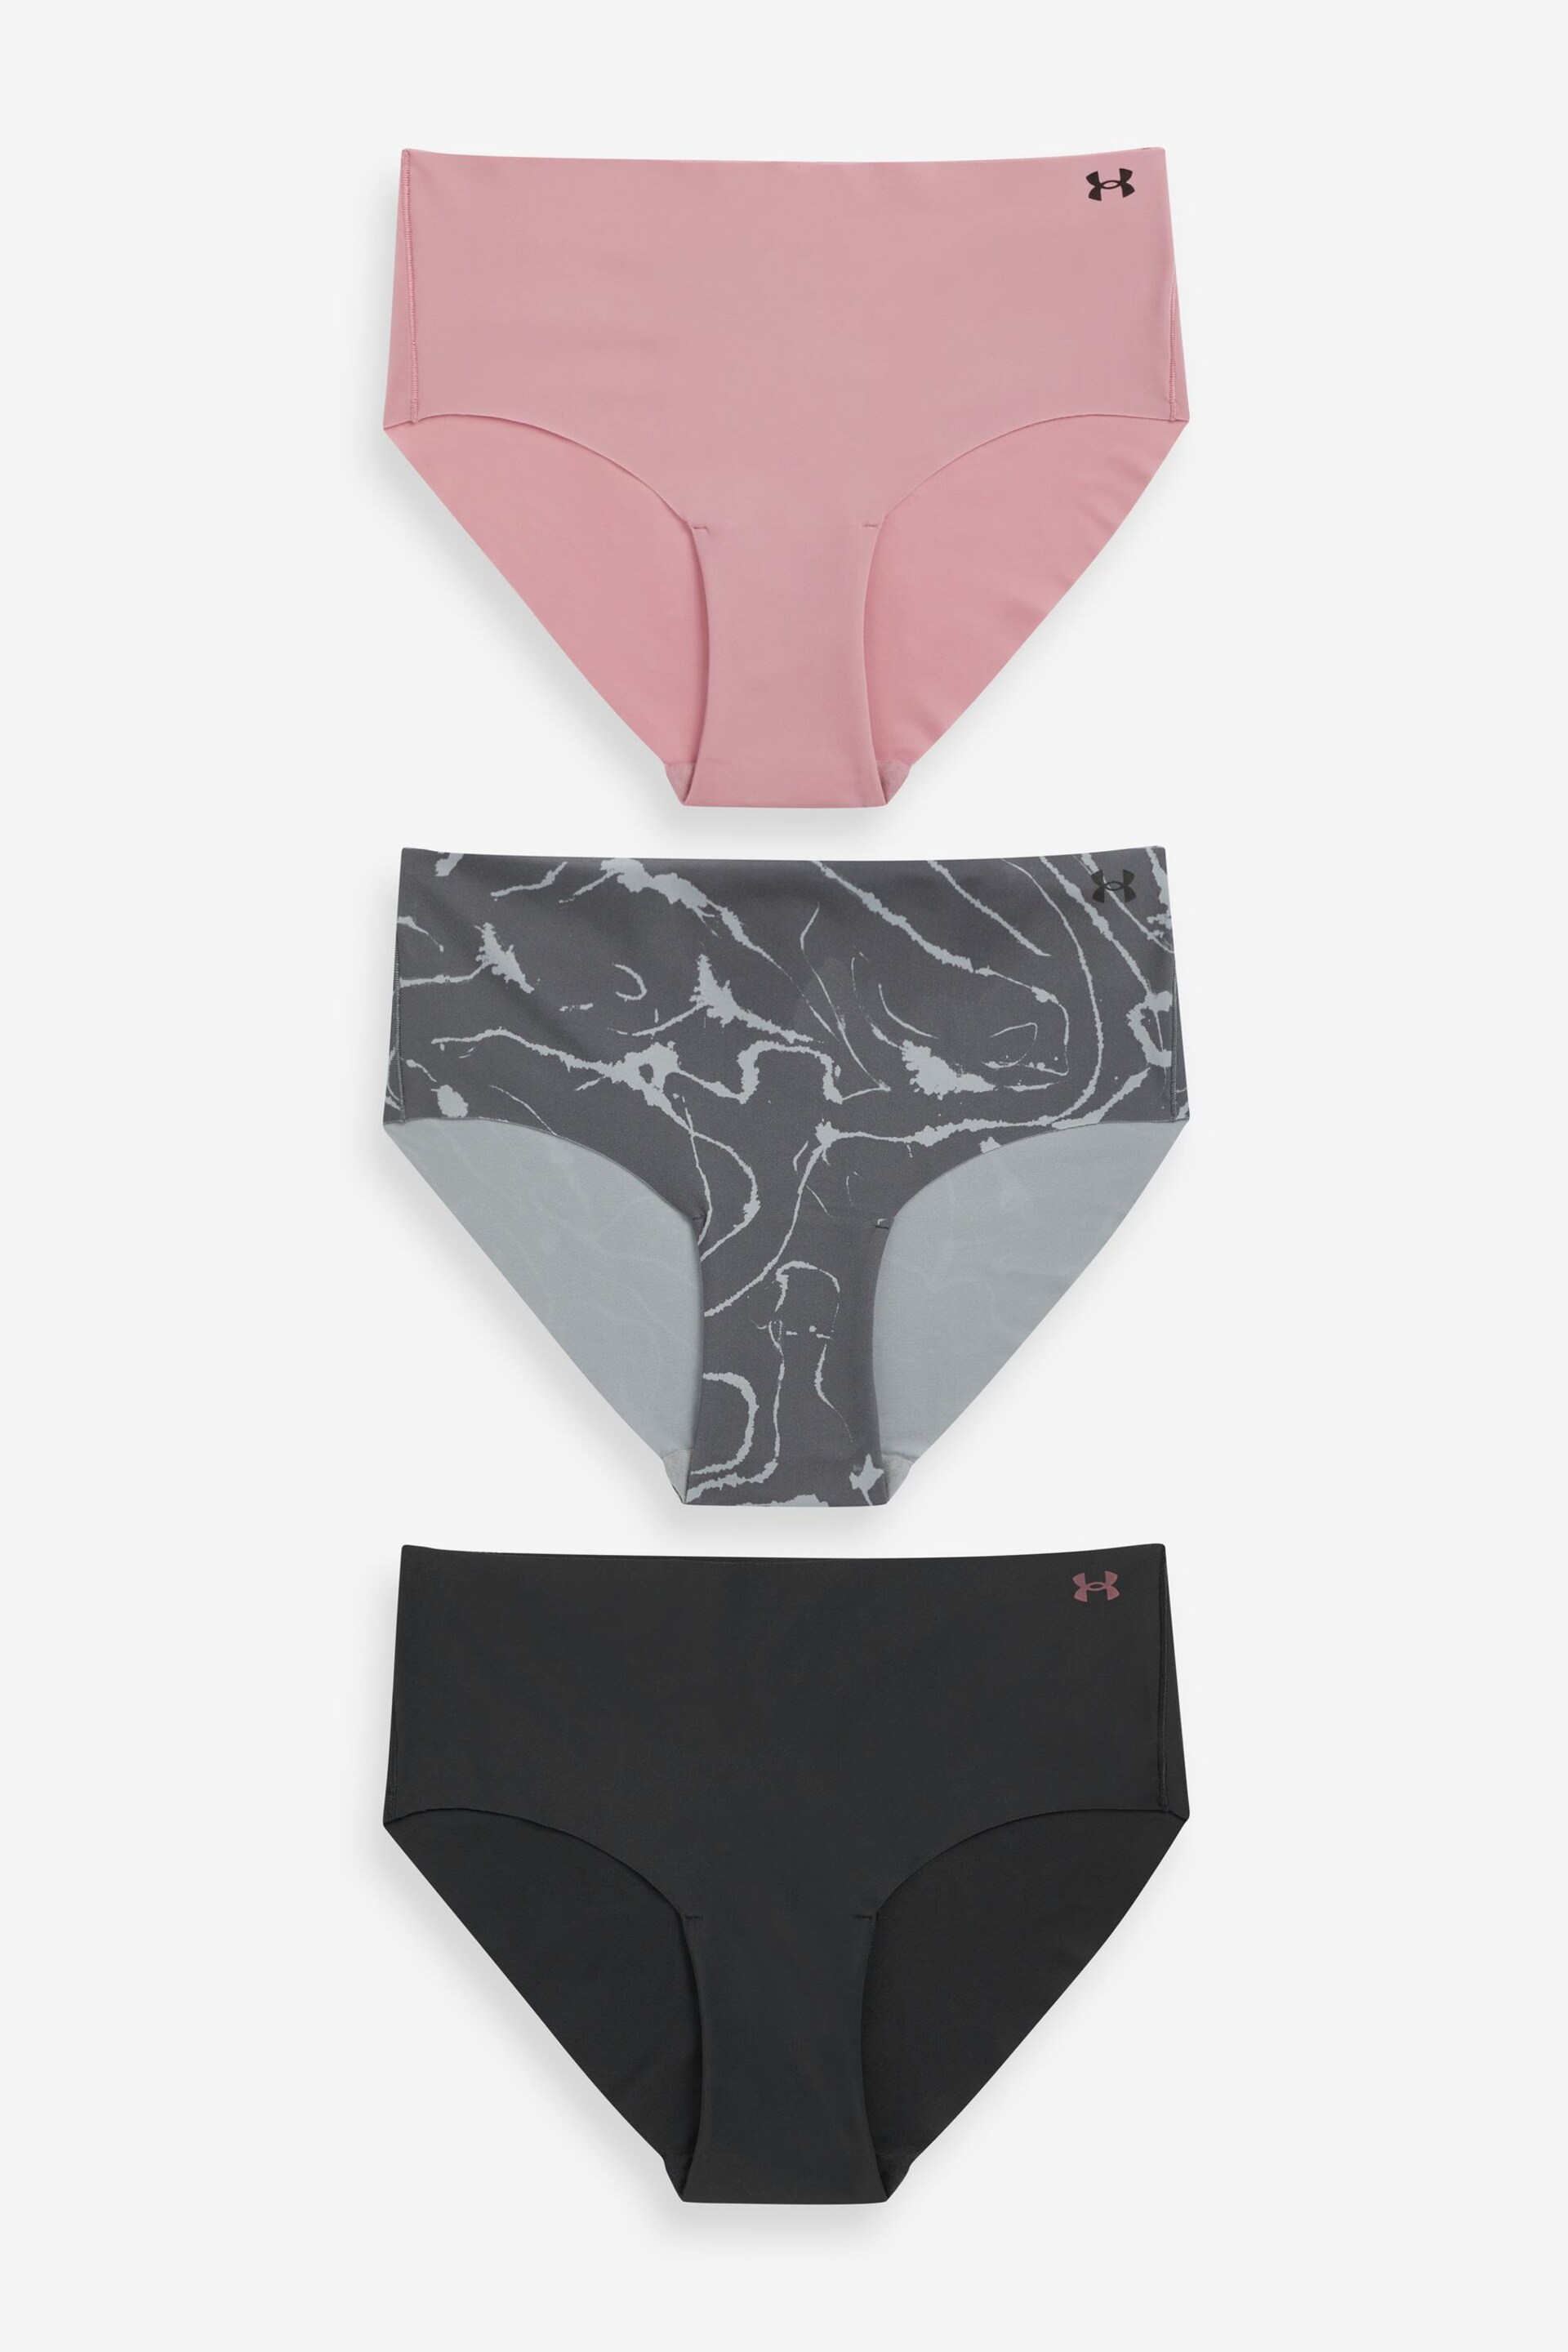 Under Armour Pink/Grey No Show Pure Stretch Hipster Printed Knickers 3 Pack - Image 1 of 6